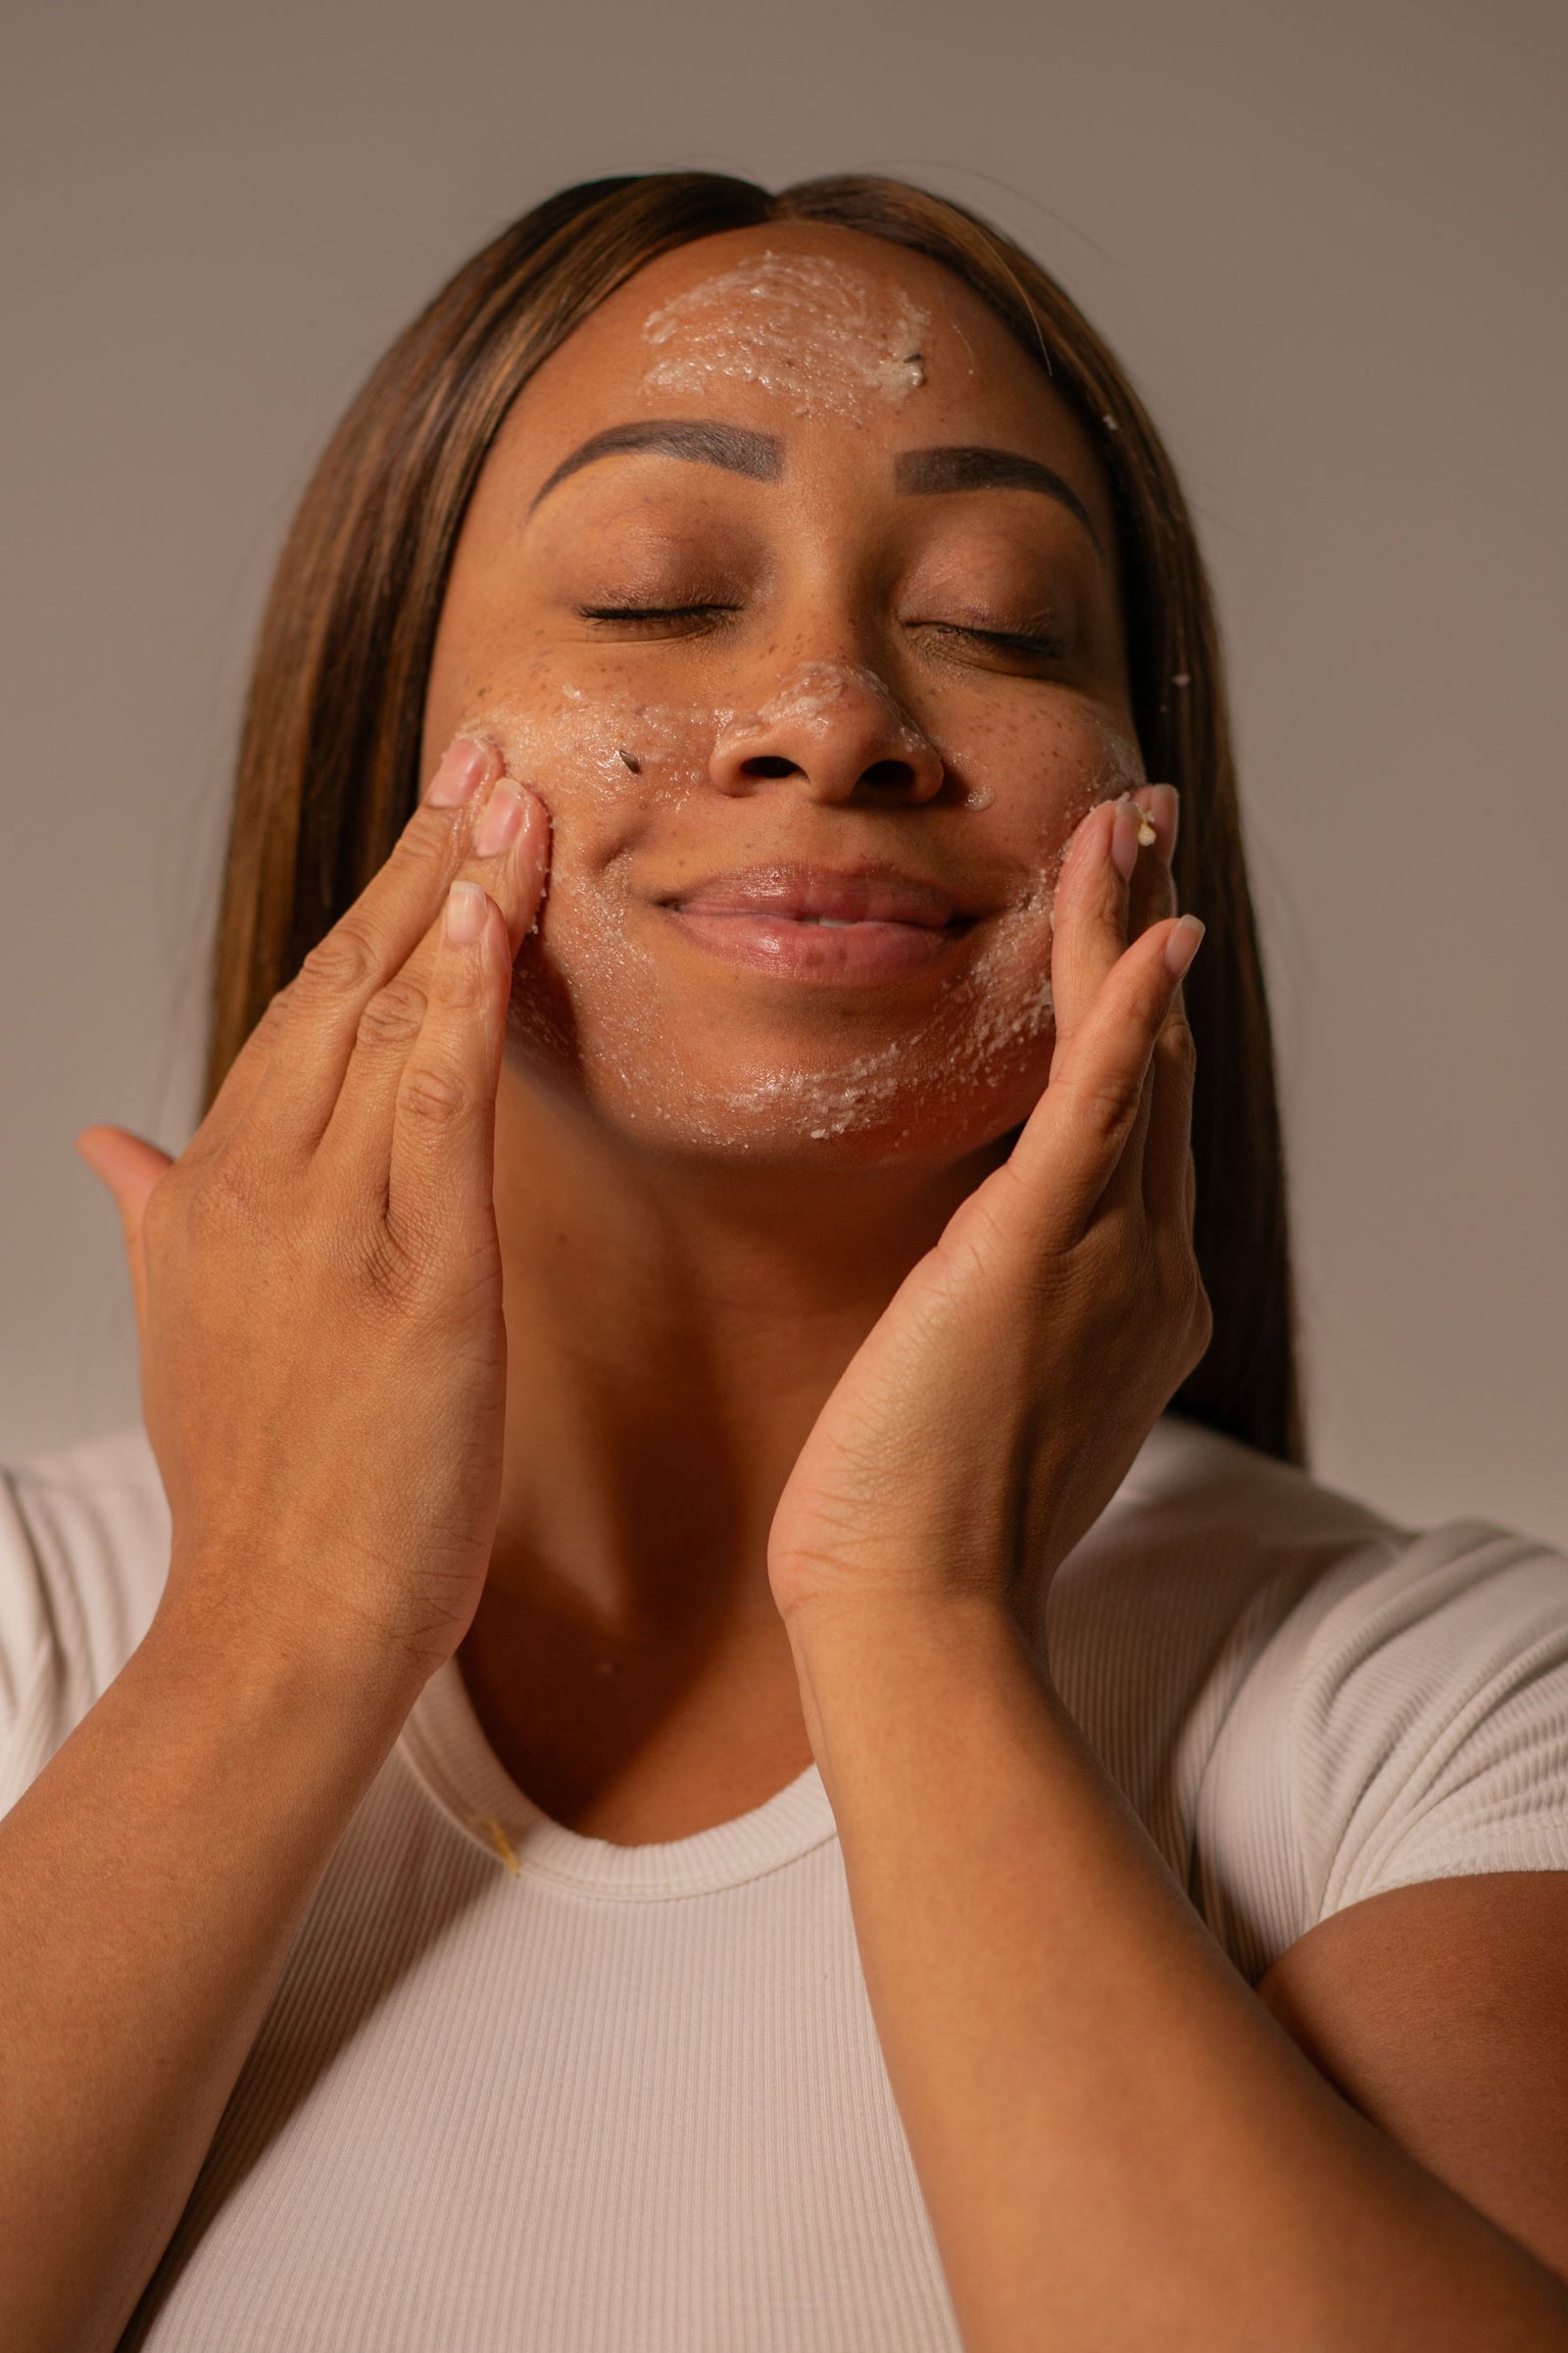 Skin and sand: Embrace natural beauty - The Statesman